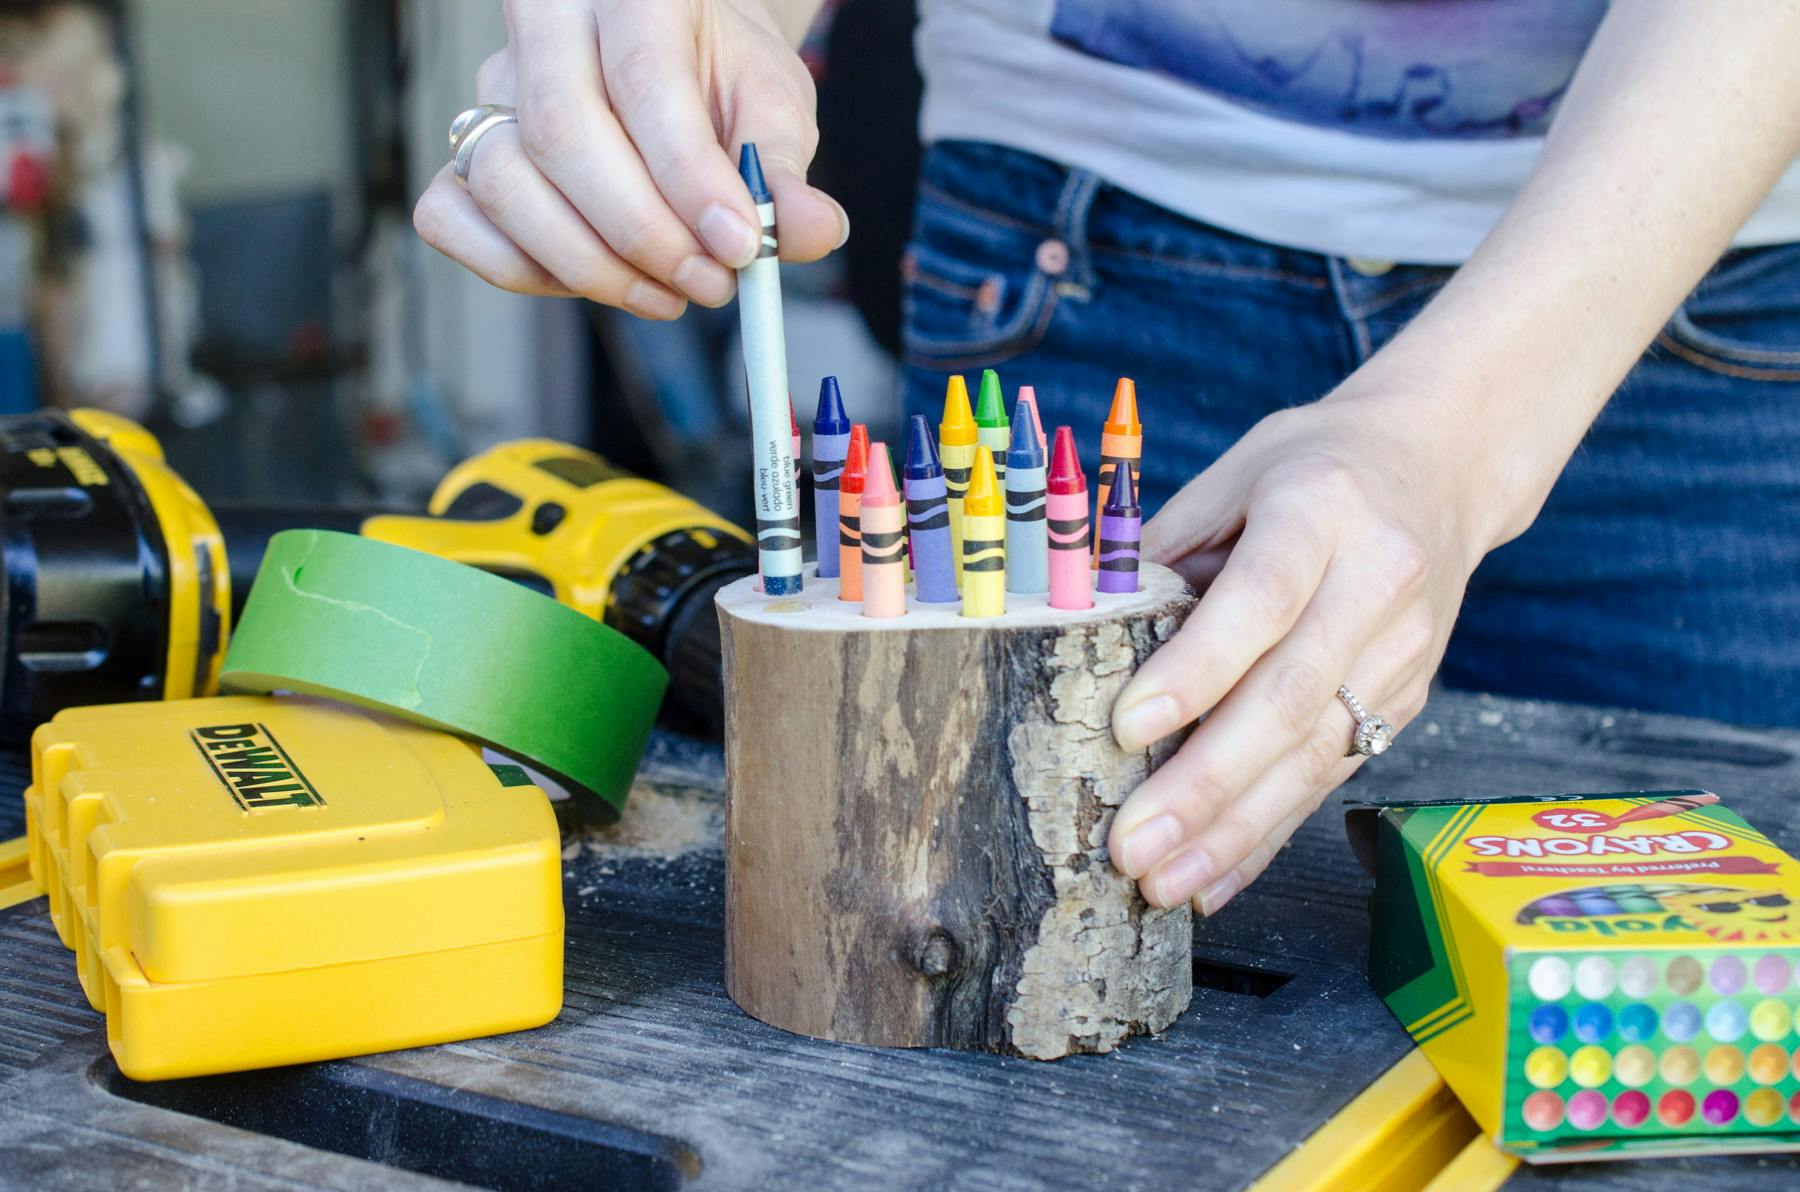 A person placing crayons into a small cut log that has holes in it to hold crayons.